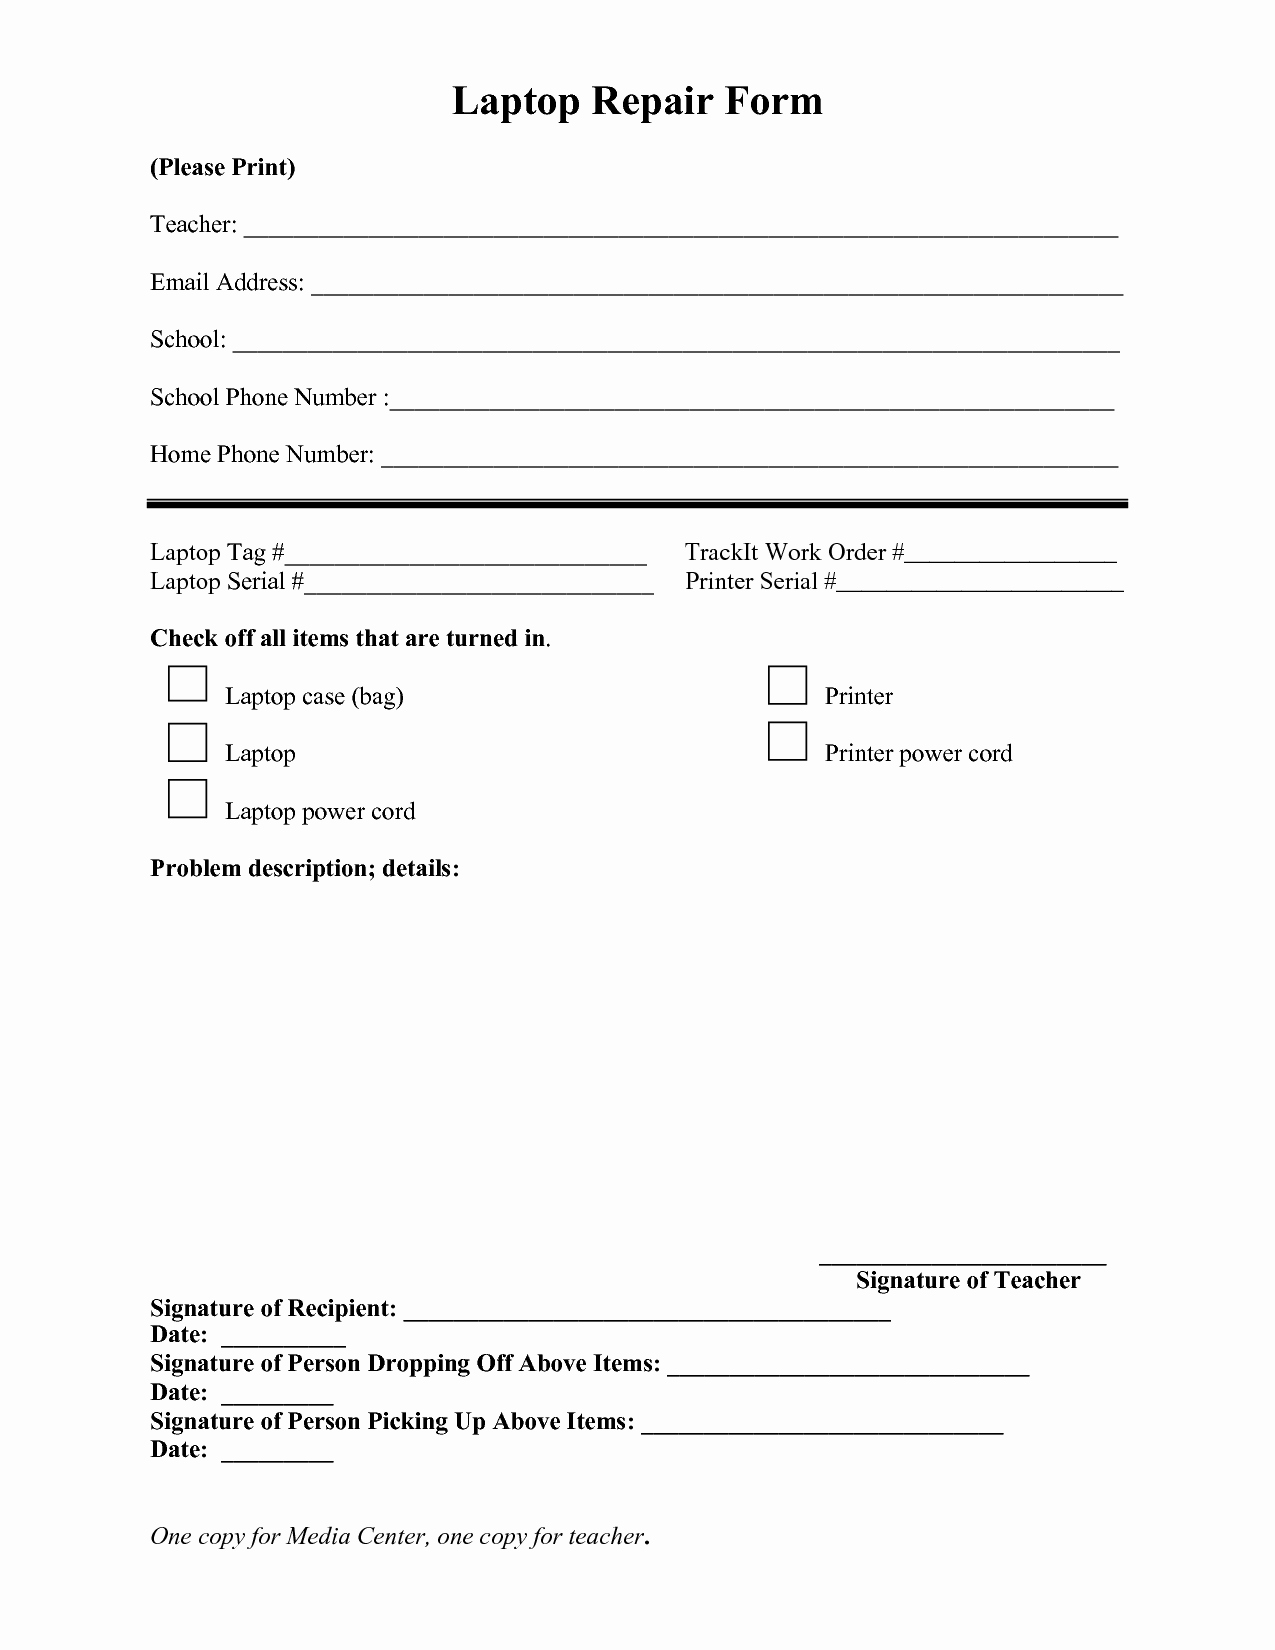 Computer Repair forms Template Lovely Puter Repair forms Free Printable Documents